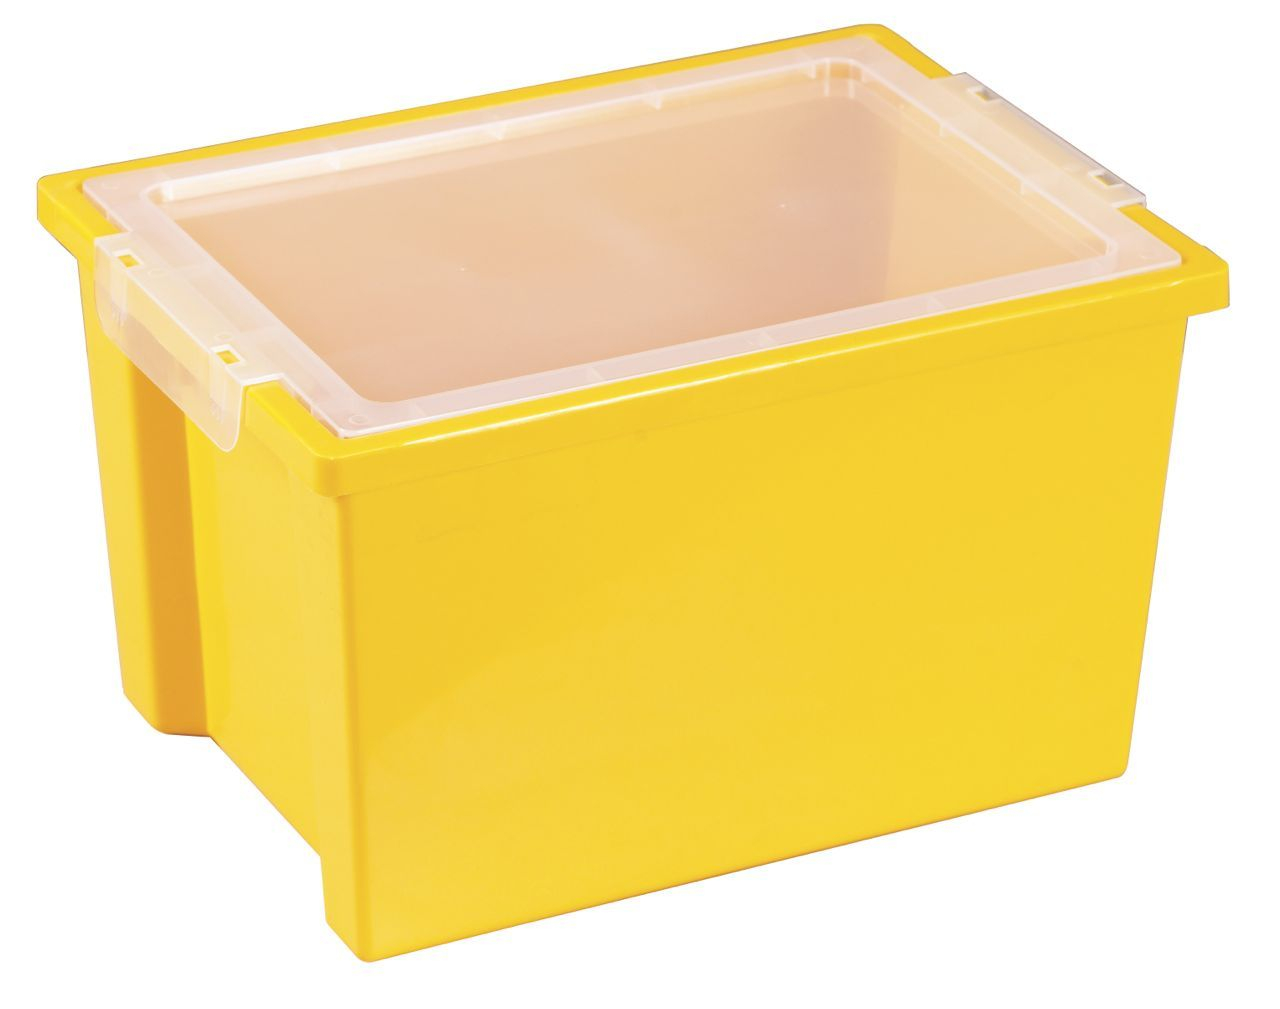 Yellow Plastic Storage Bins With Lids Clear And Set Of 4 Colorful pertaining to sizing 1280 X 1009